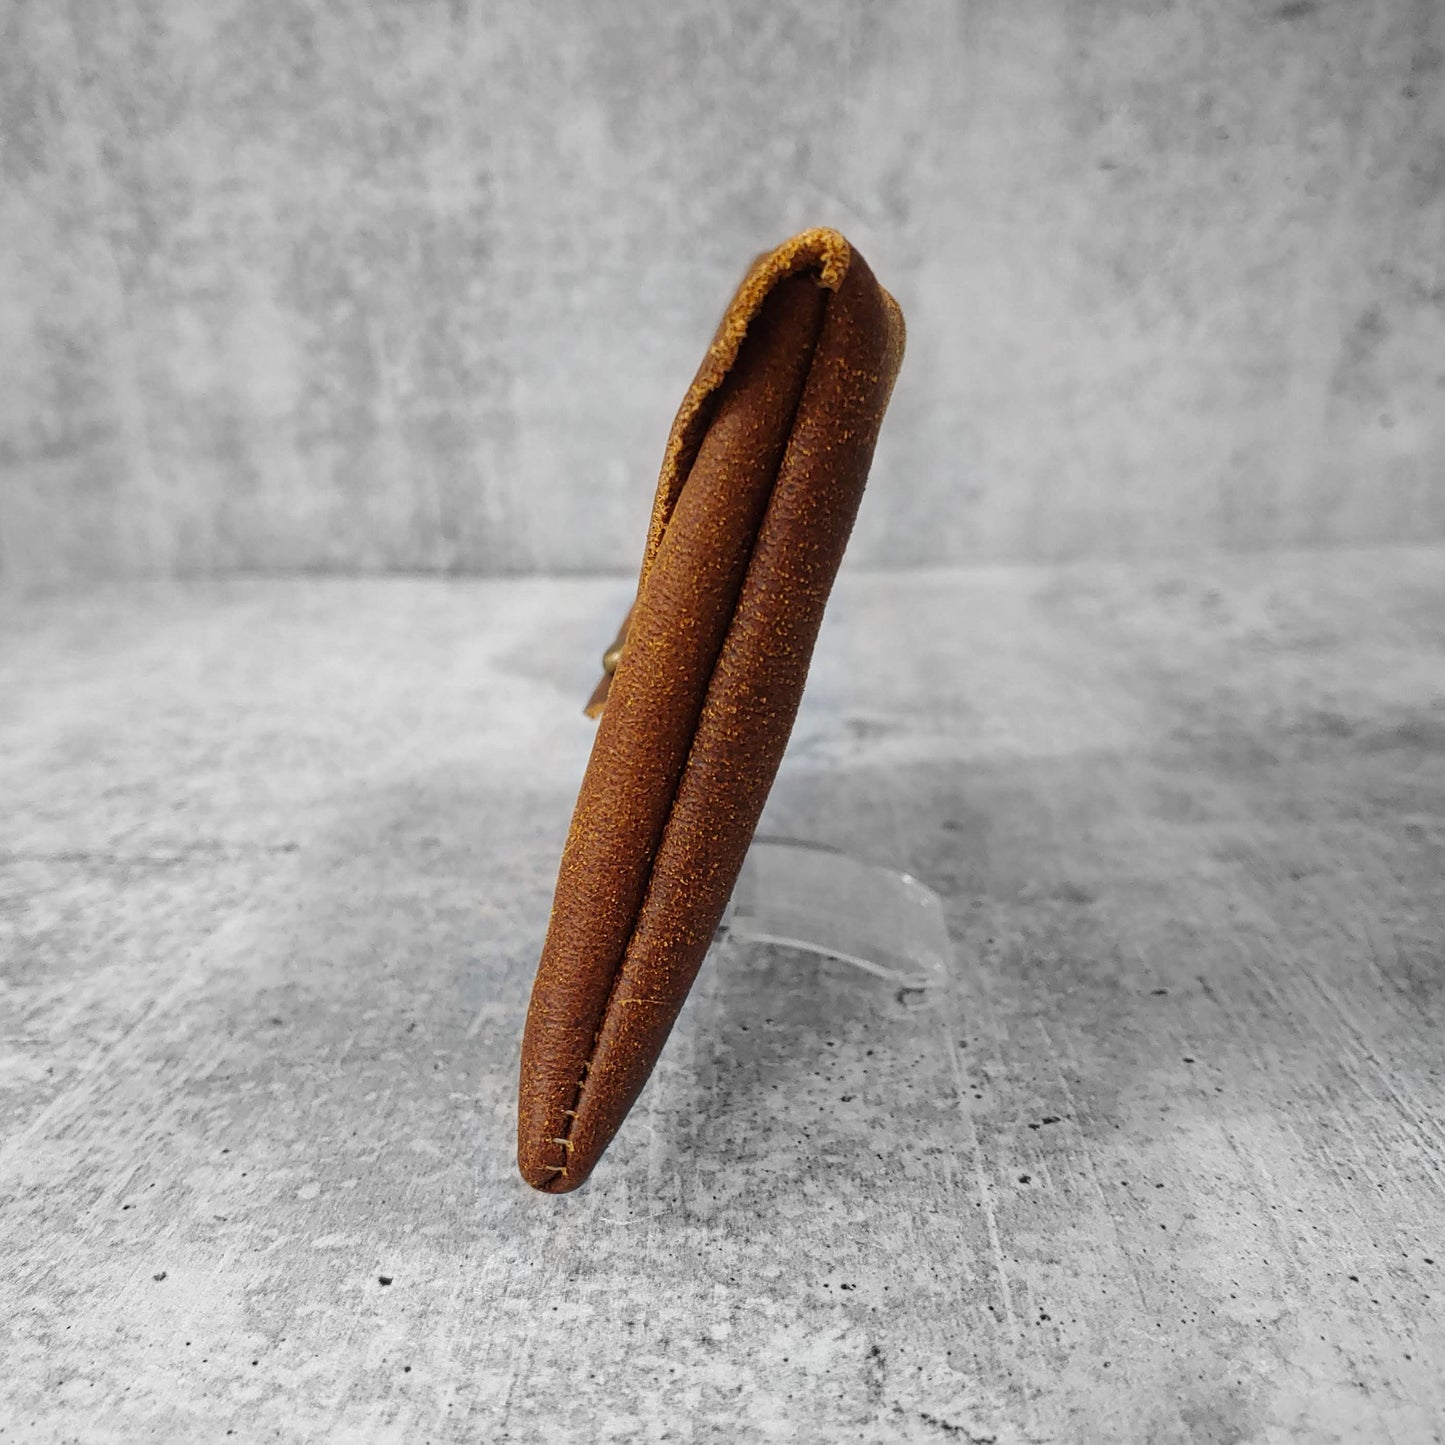 Side view of "soft leather clutch triangle" in walnut against a concrete background.